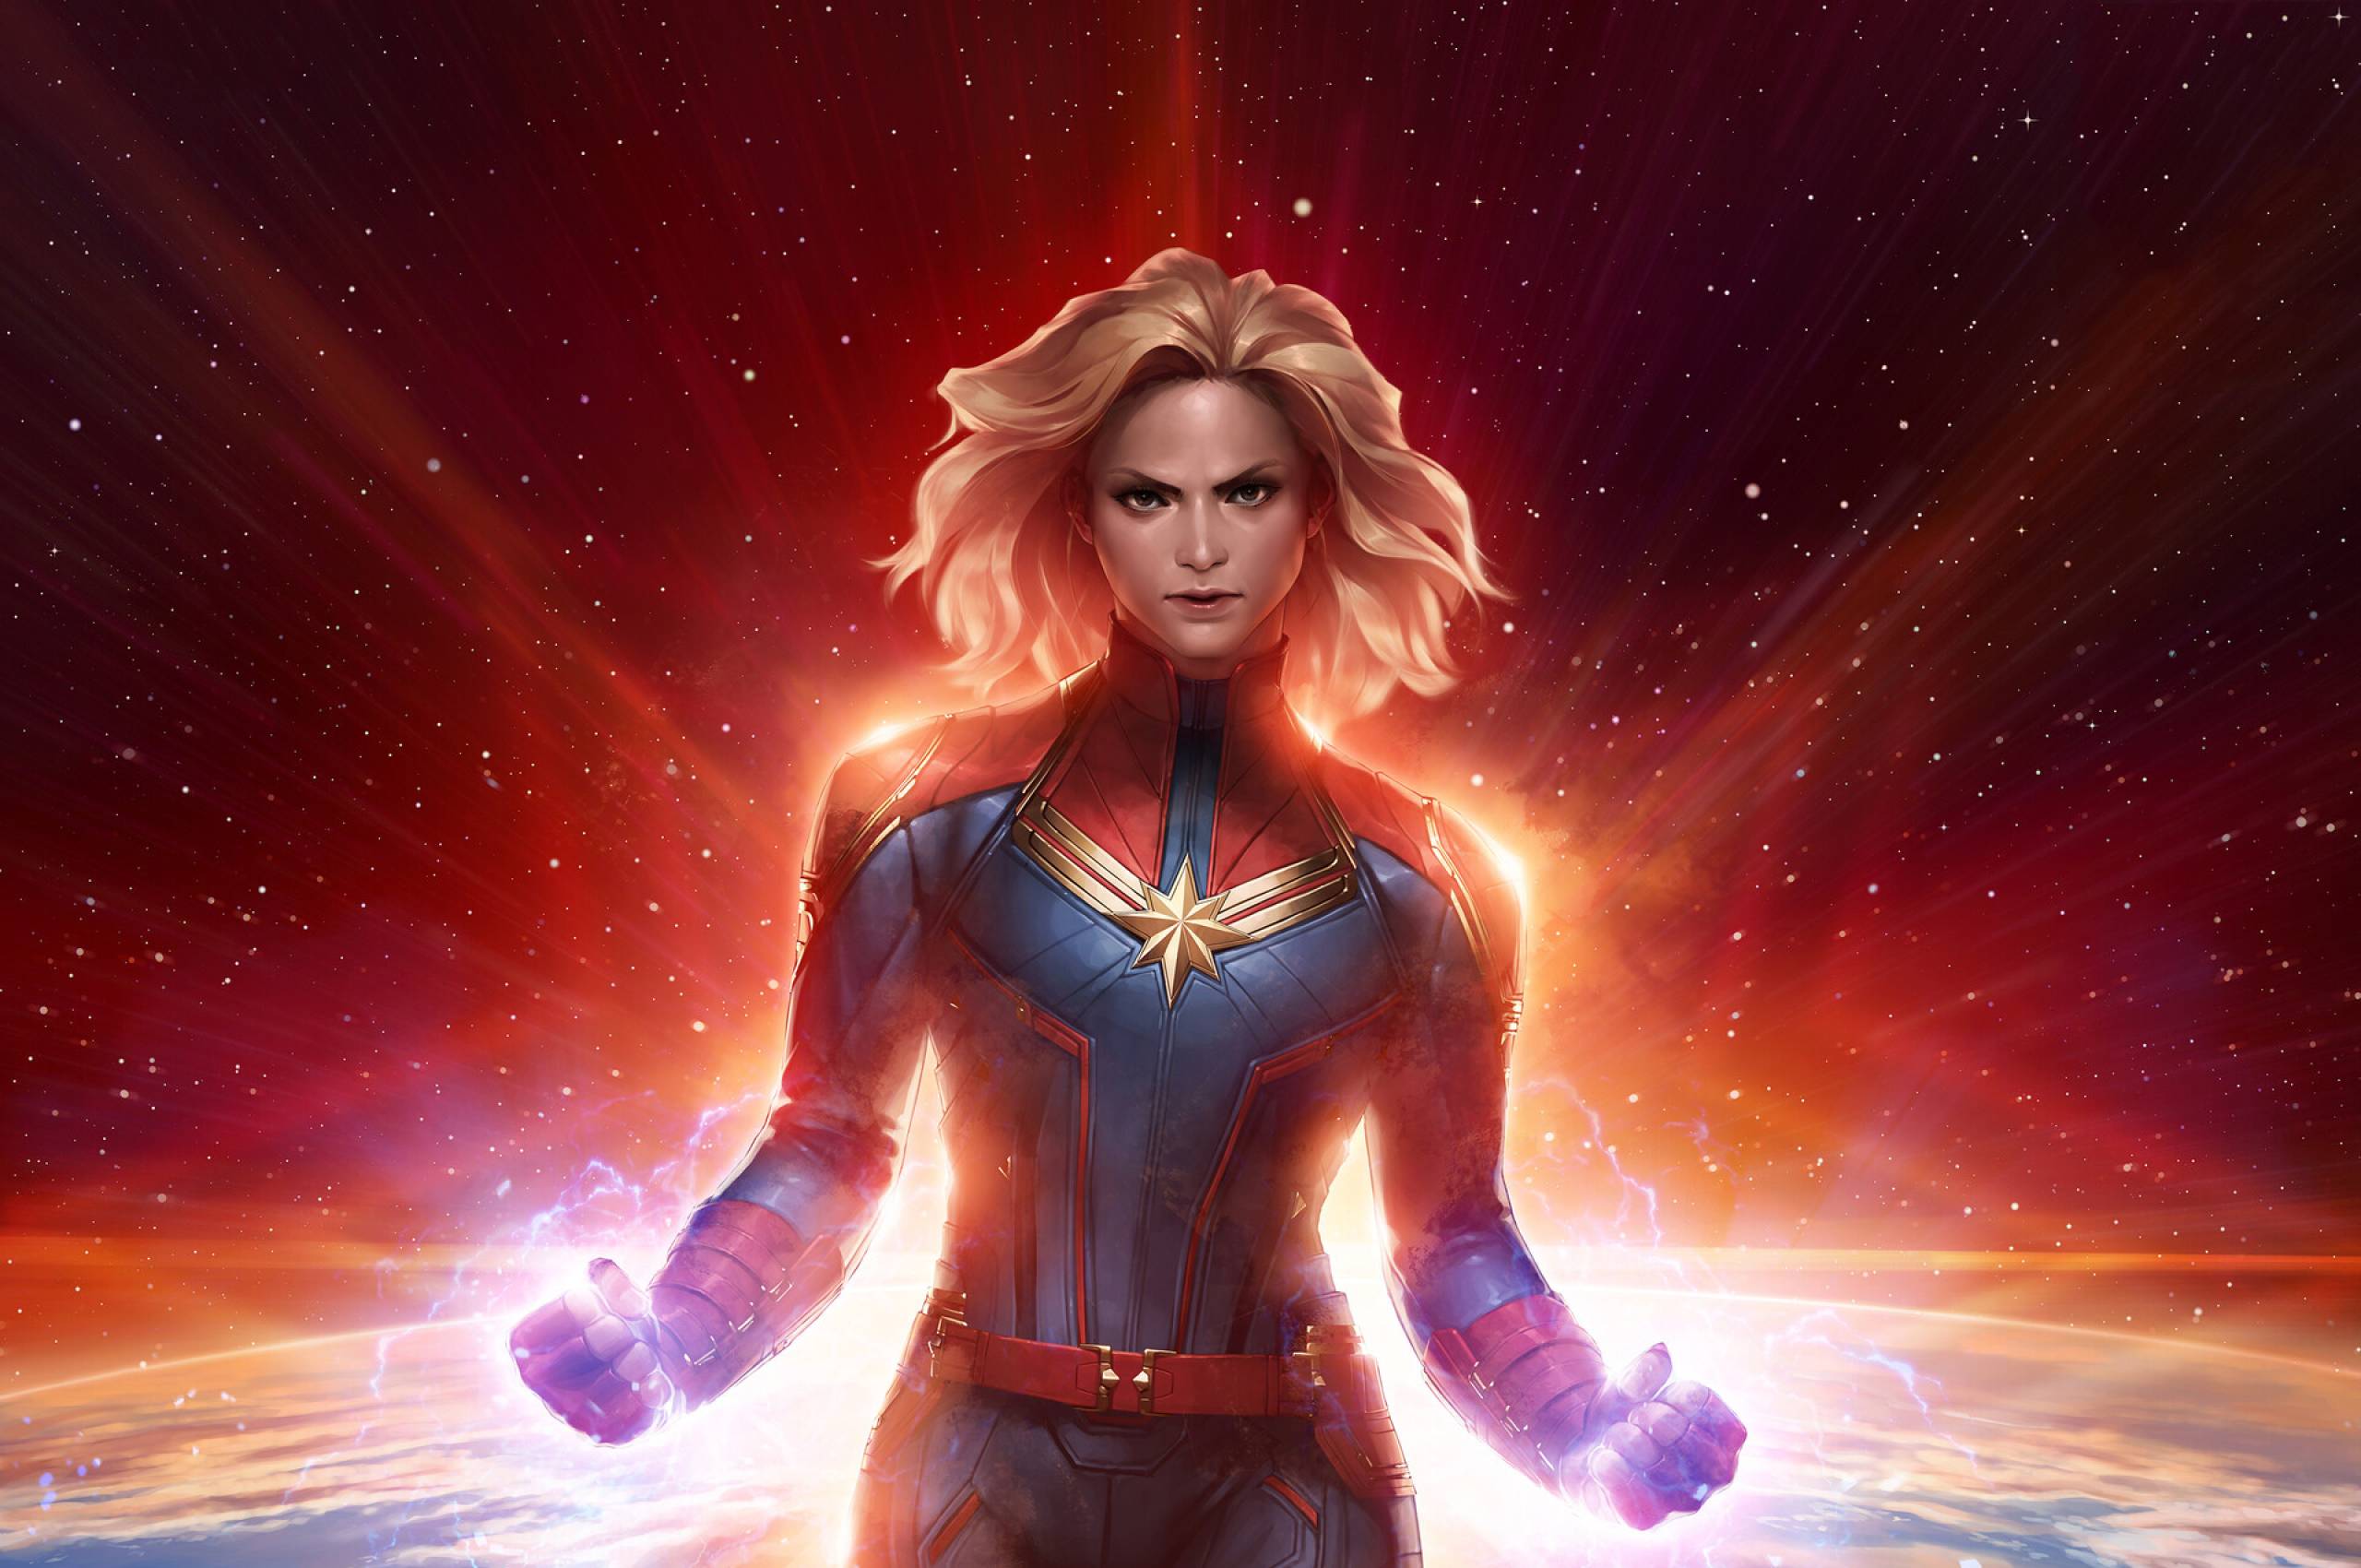 Marvel Future Fight Captain Marvel Chromebook Pixel Wallpaper, HD Games 4K Wallpaper, Image, Photo and Background